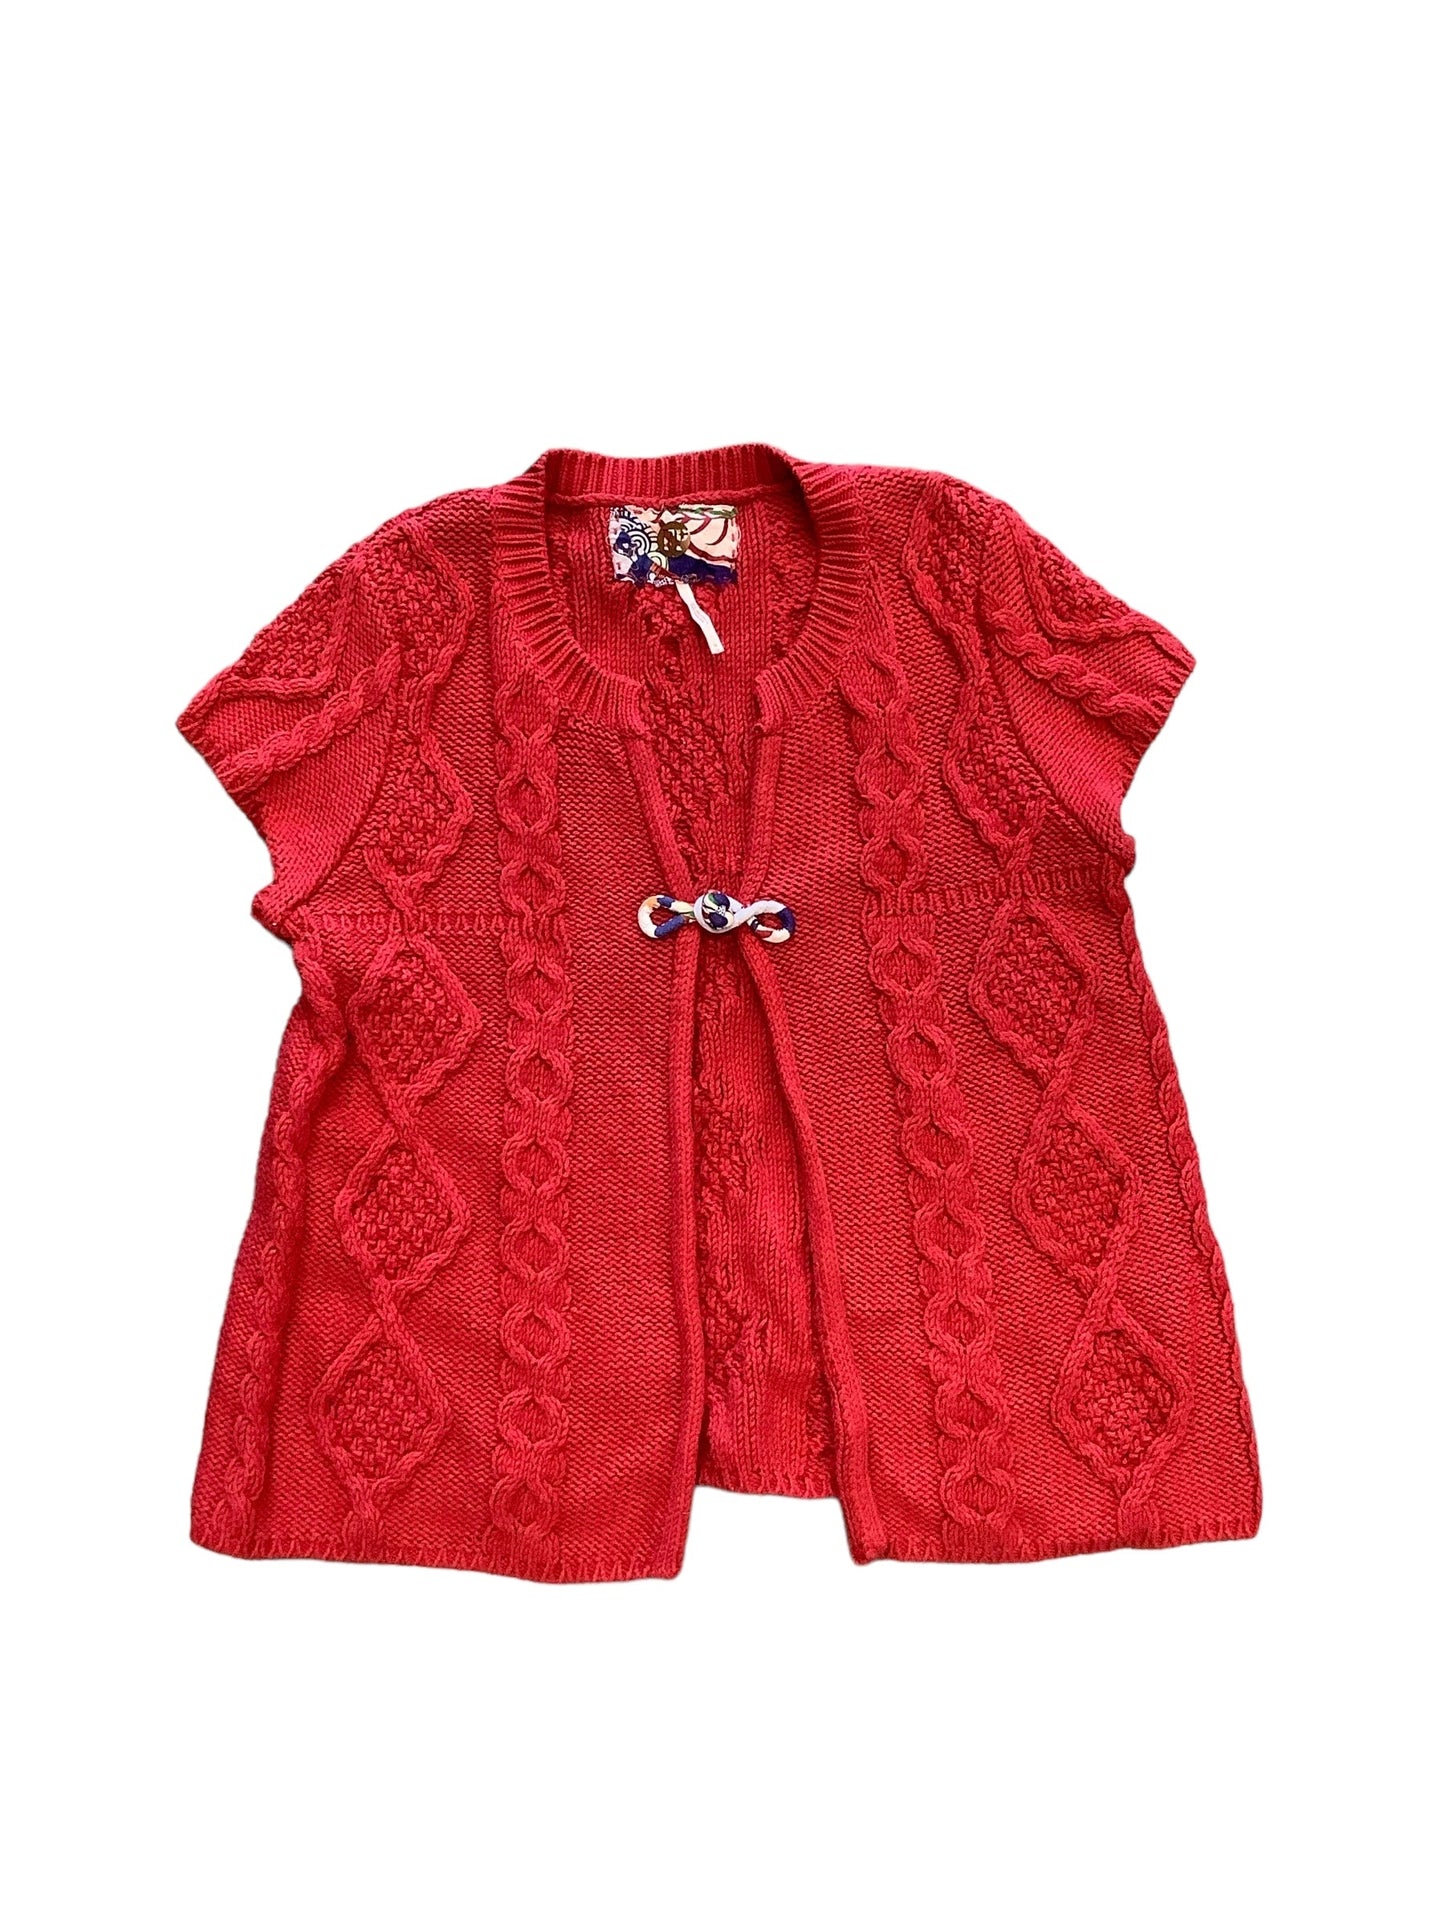 Red Vest Sweater Free People, Size M